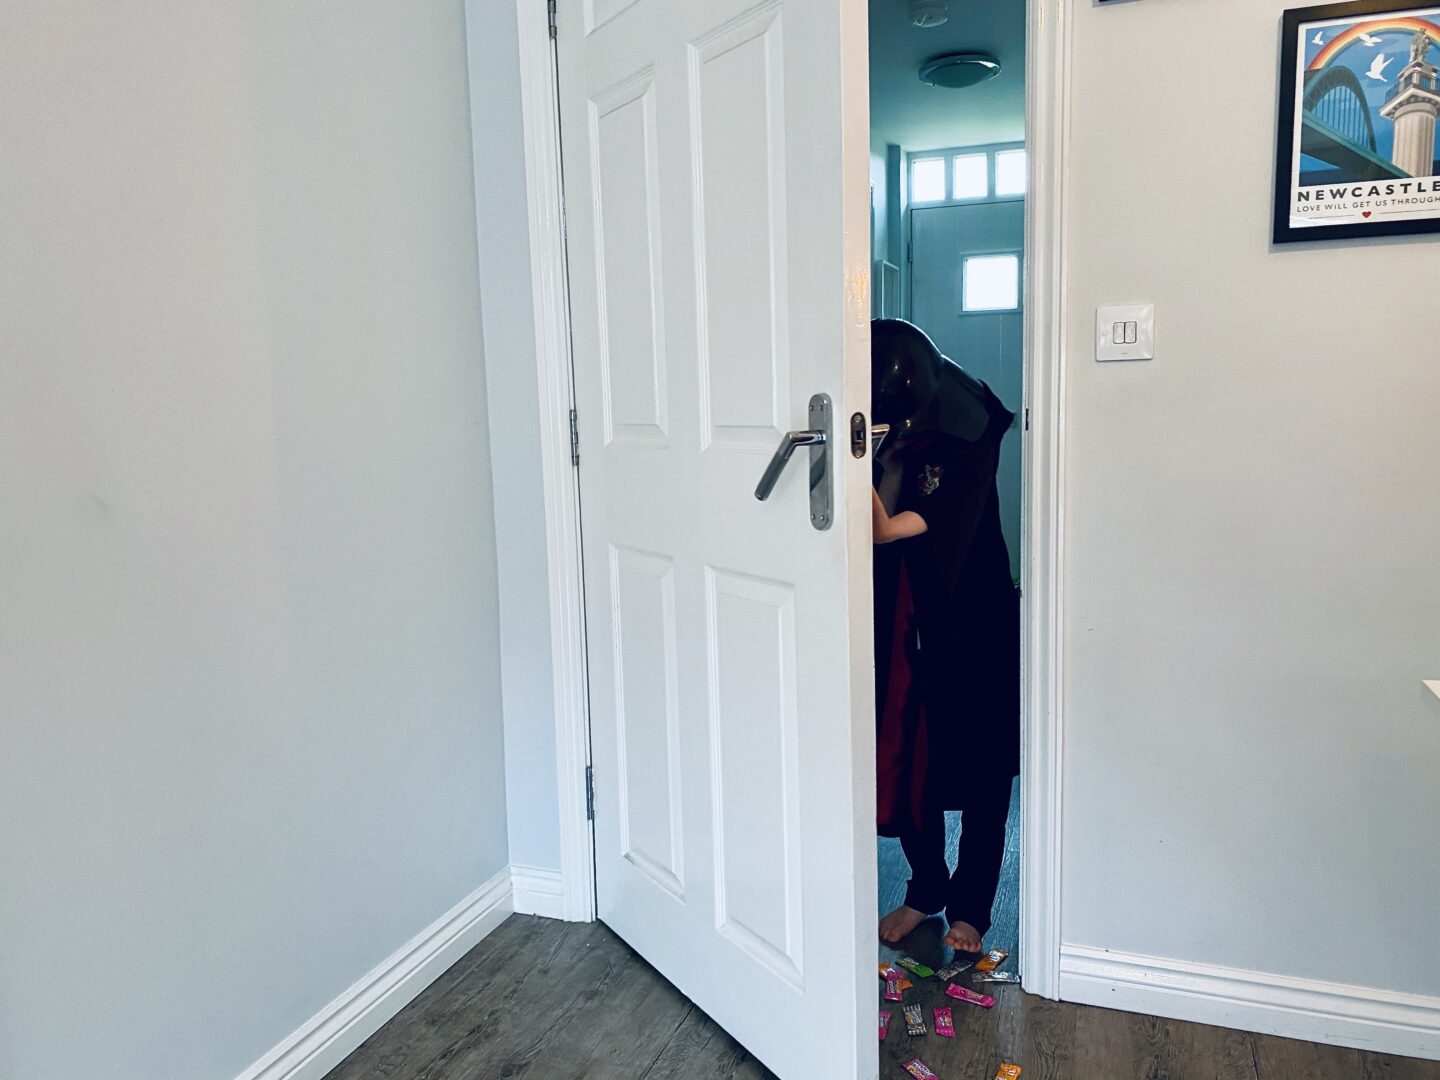 A boy opening a door and sweets falling down. 